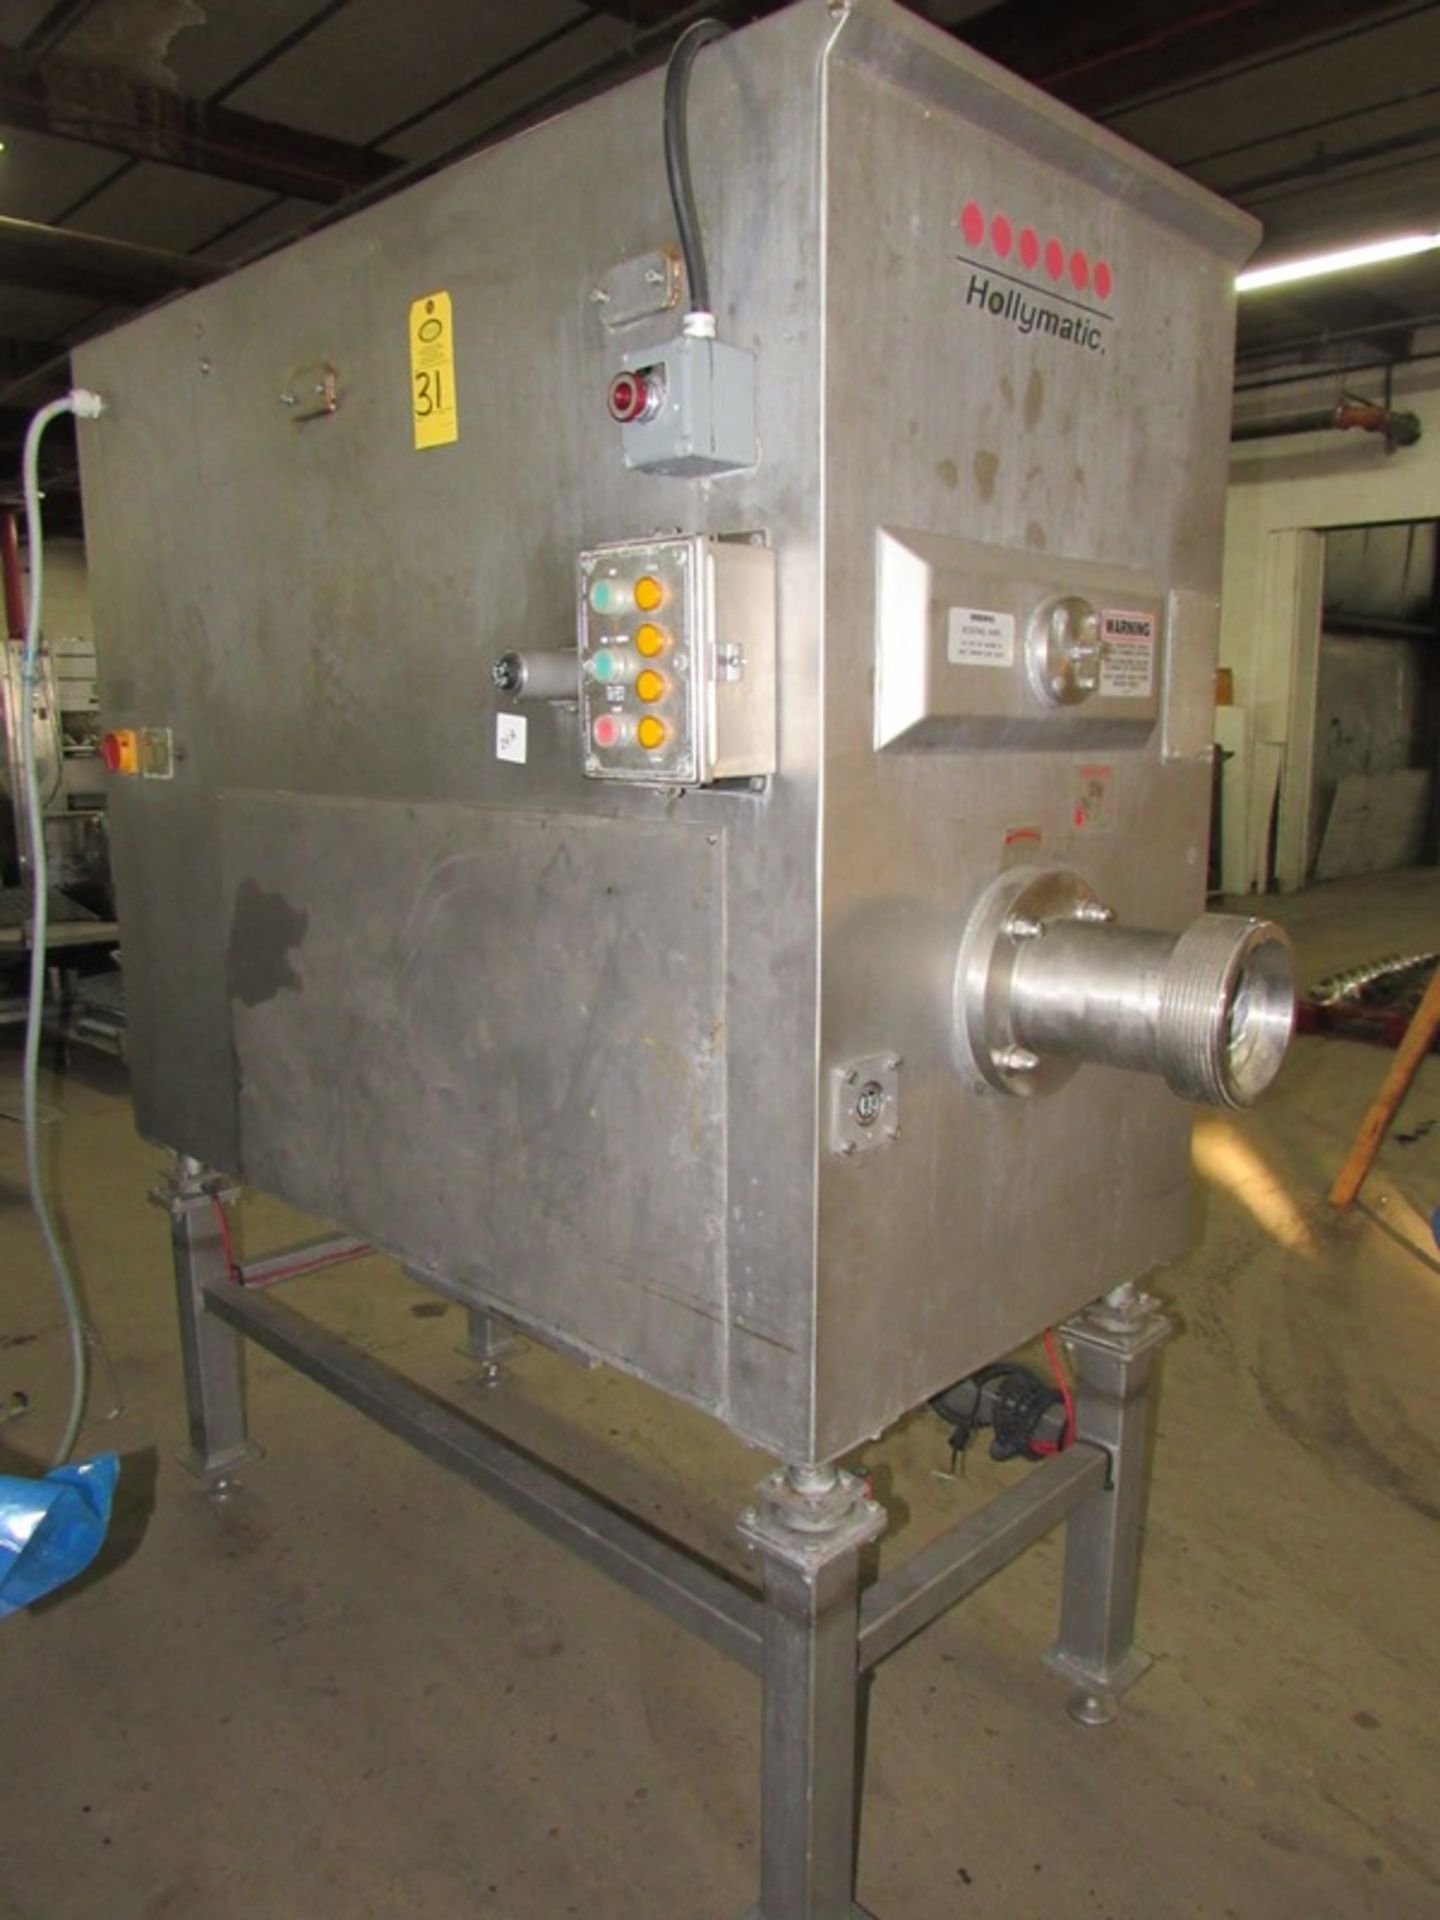 Hollymatic Mdl.; 4300 Mixer/Grinder, 6" head, on load cells, (no scale), with auger,missing ring,